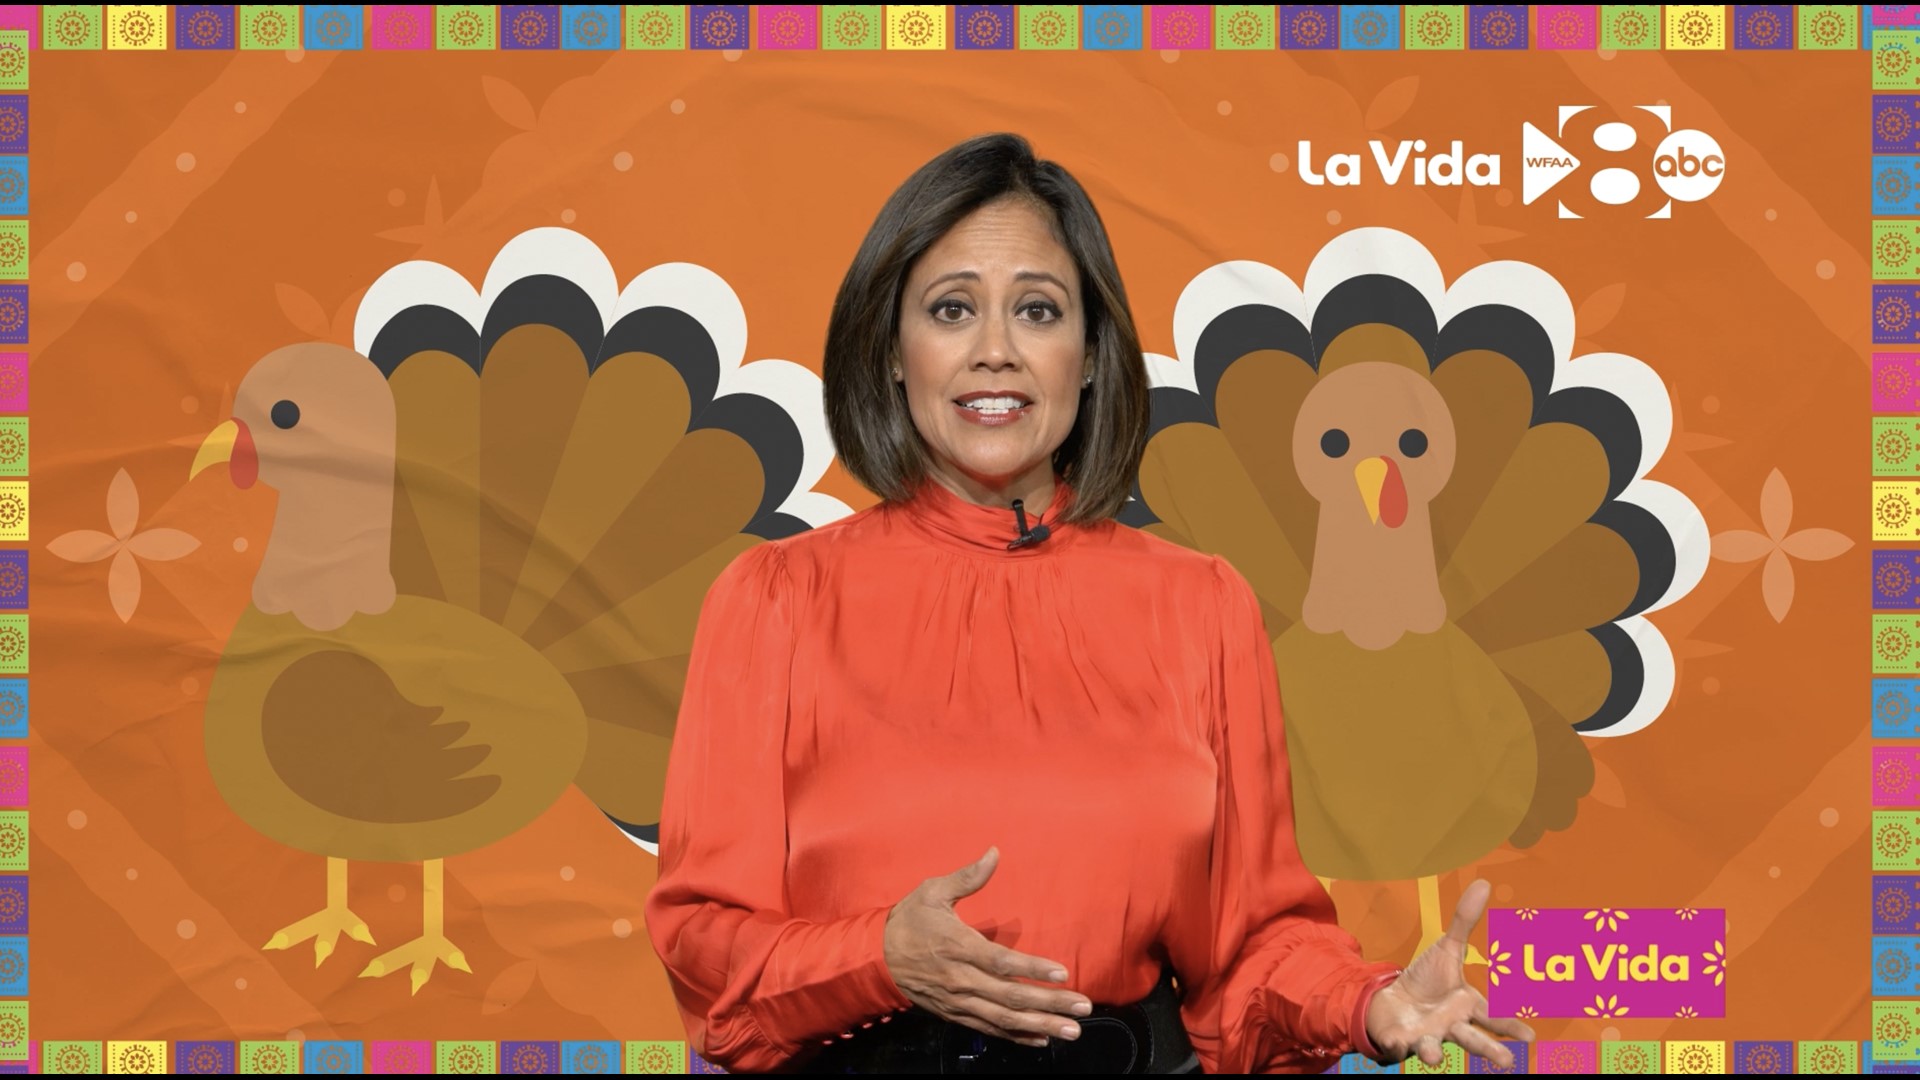 The holiday season is here! How do you say "turkey" in español? For more Spanish content, visit wfaa.com/noticias